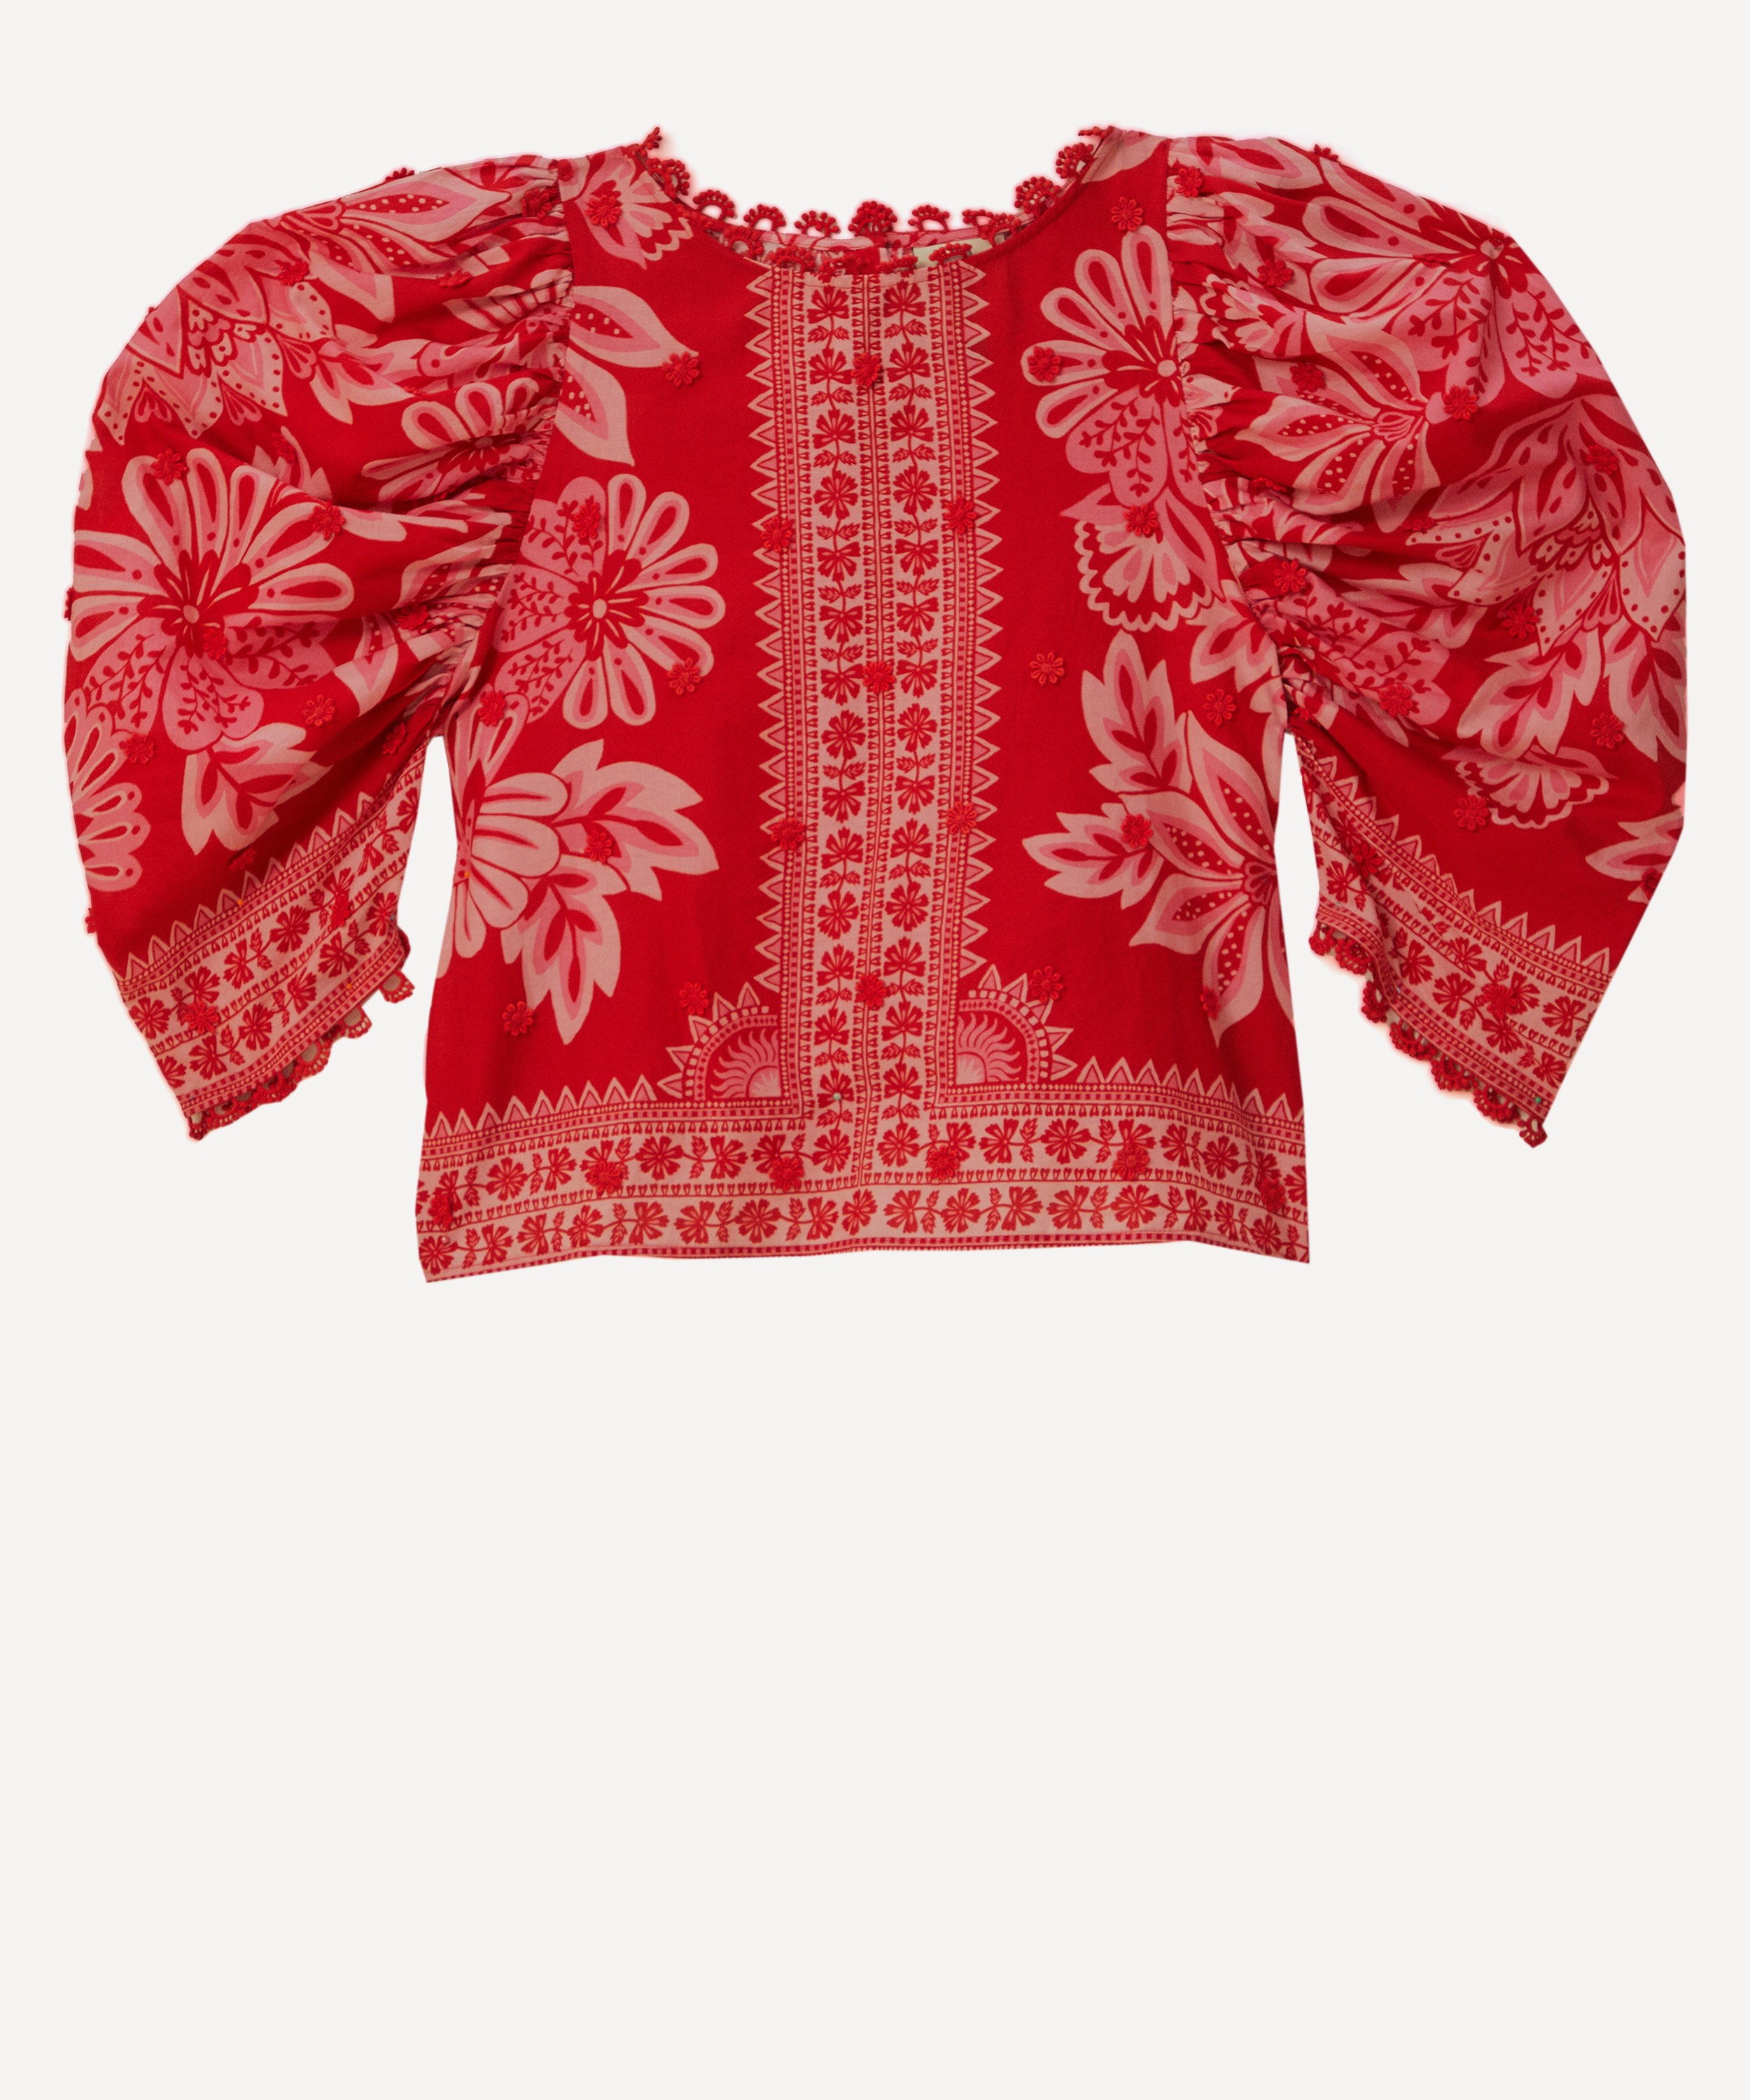 FARM Rio - Flora Tapestry Red Blouse image number 0